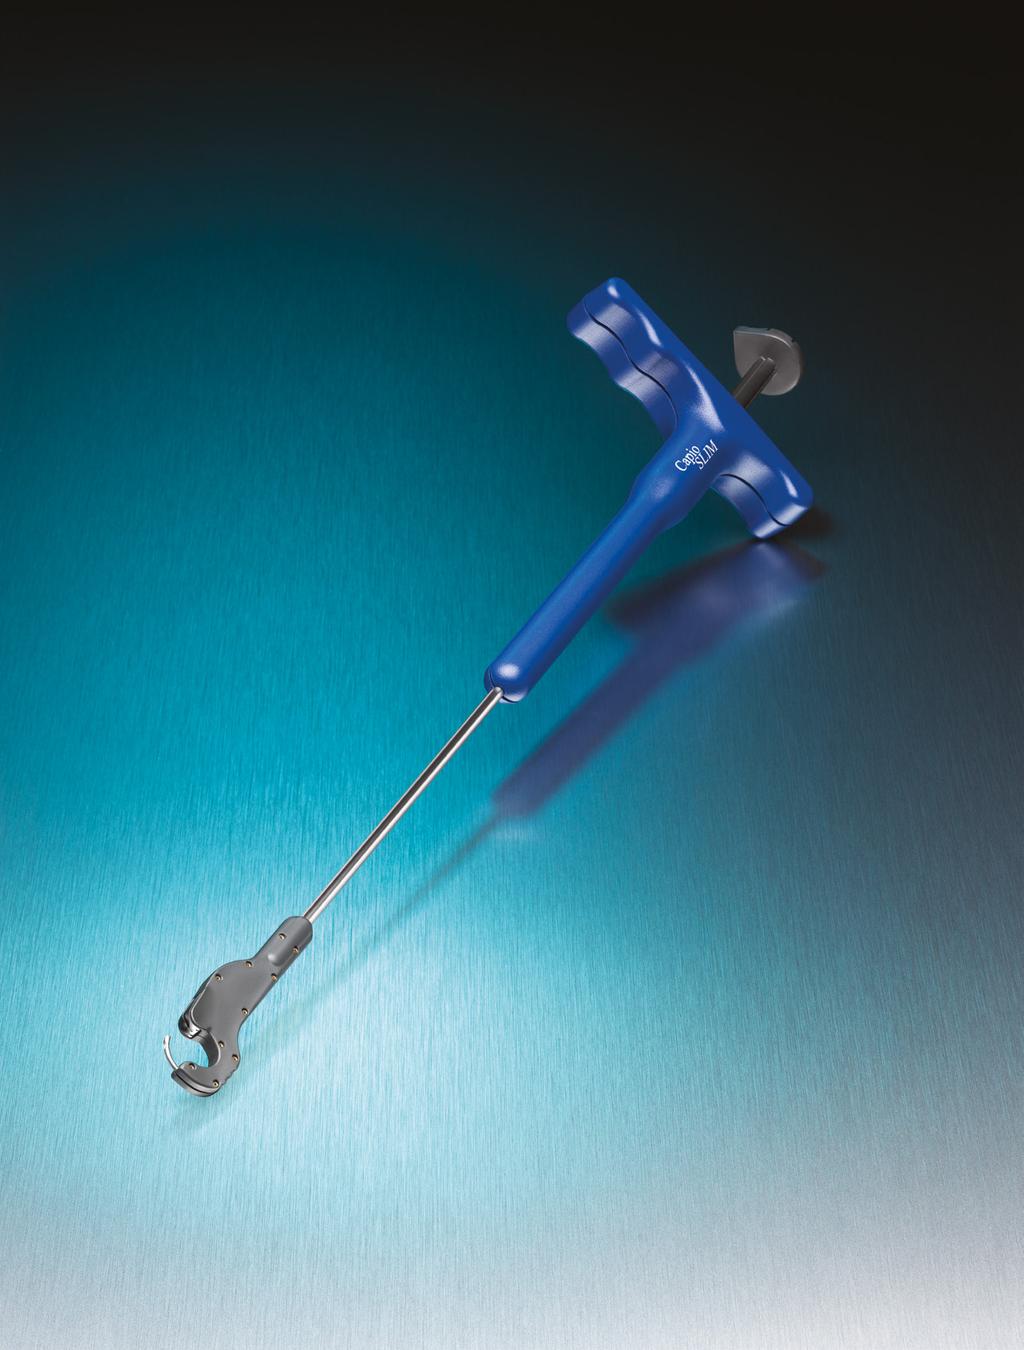 The Suture Capturing Device is designed to enable an intra-vaginal, trocar-free, minimally invasive prolapse repair. The Capio Device is designed for use with the System and custom graft repairs.